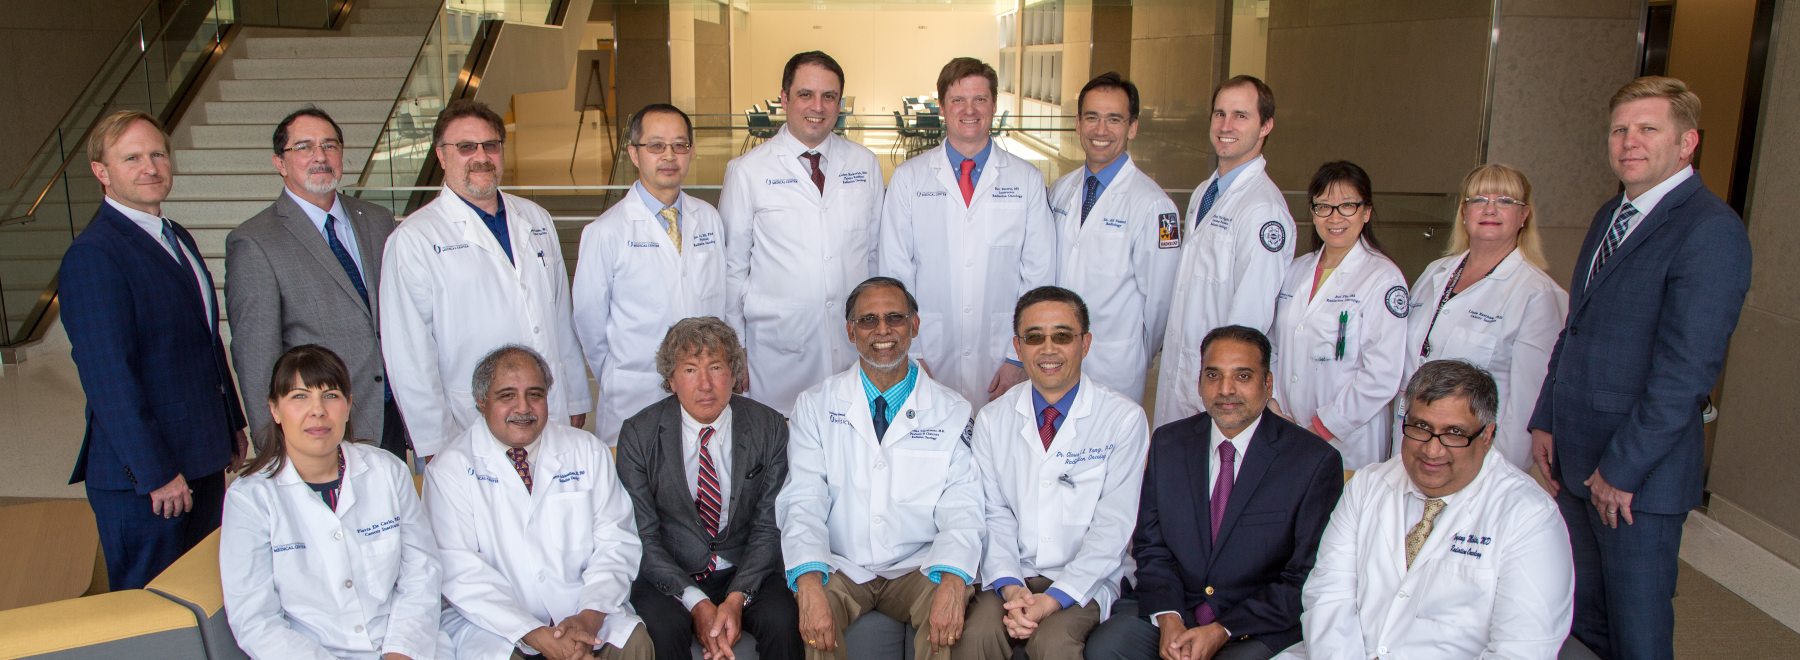 A group shot of the entire radiation oncology faculty.